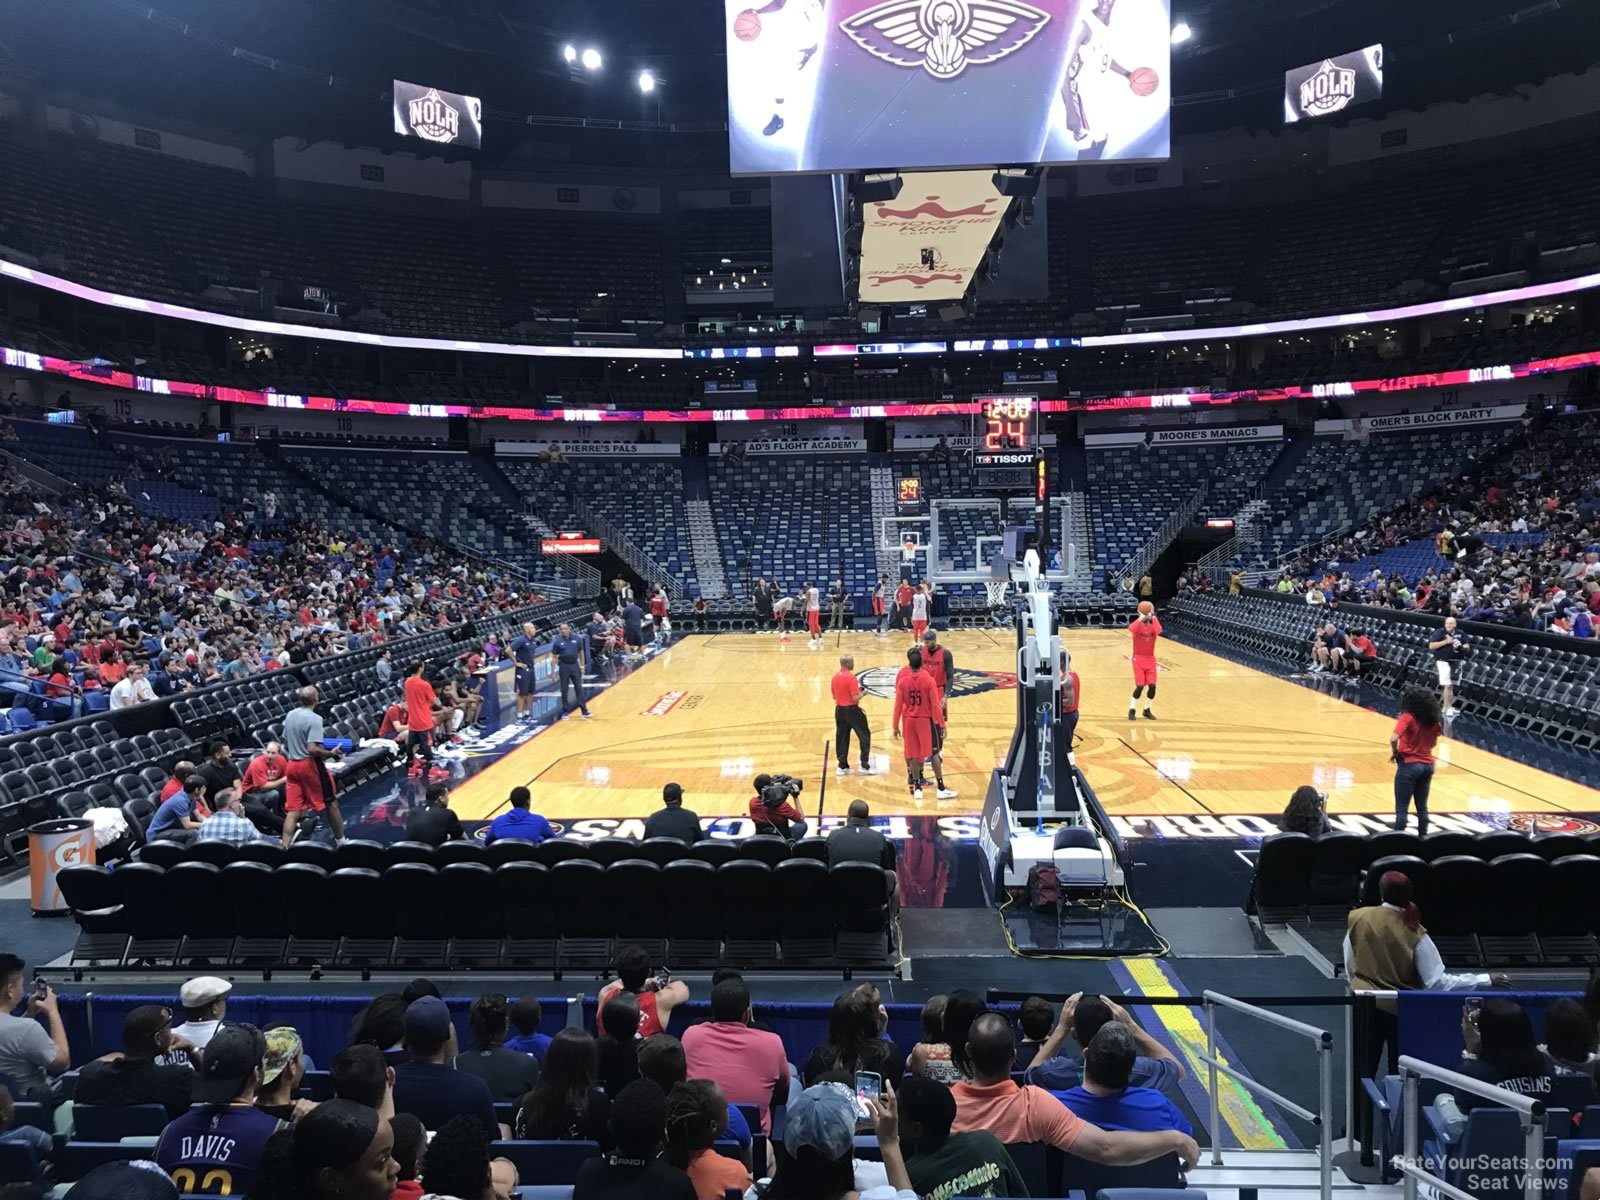 section 107, row 9 seat view  for basketball - smoothie king center